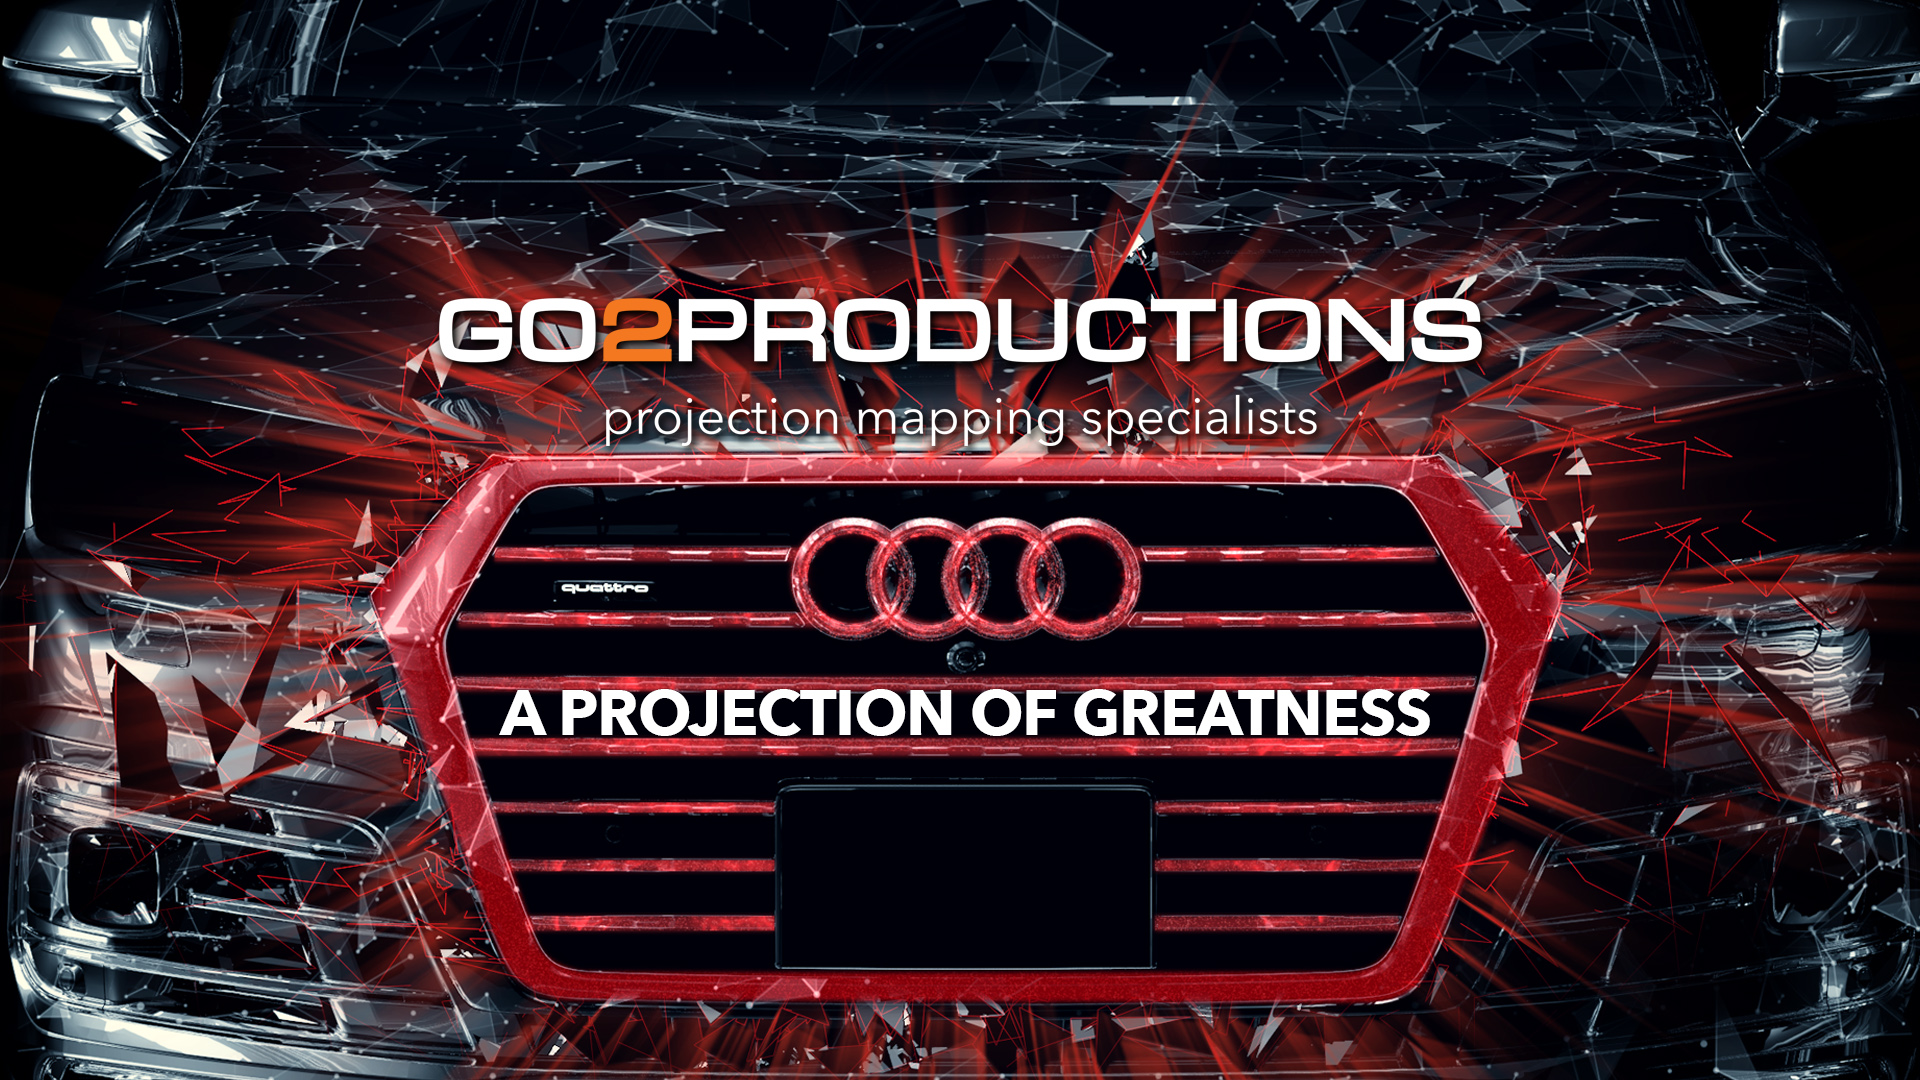 Audi – A Projection of Greatness